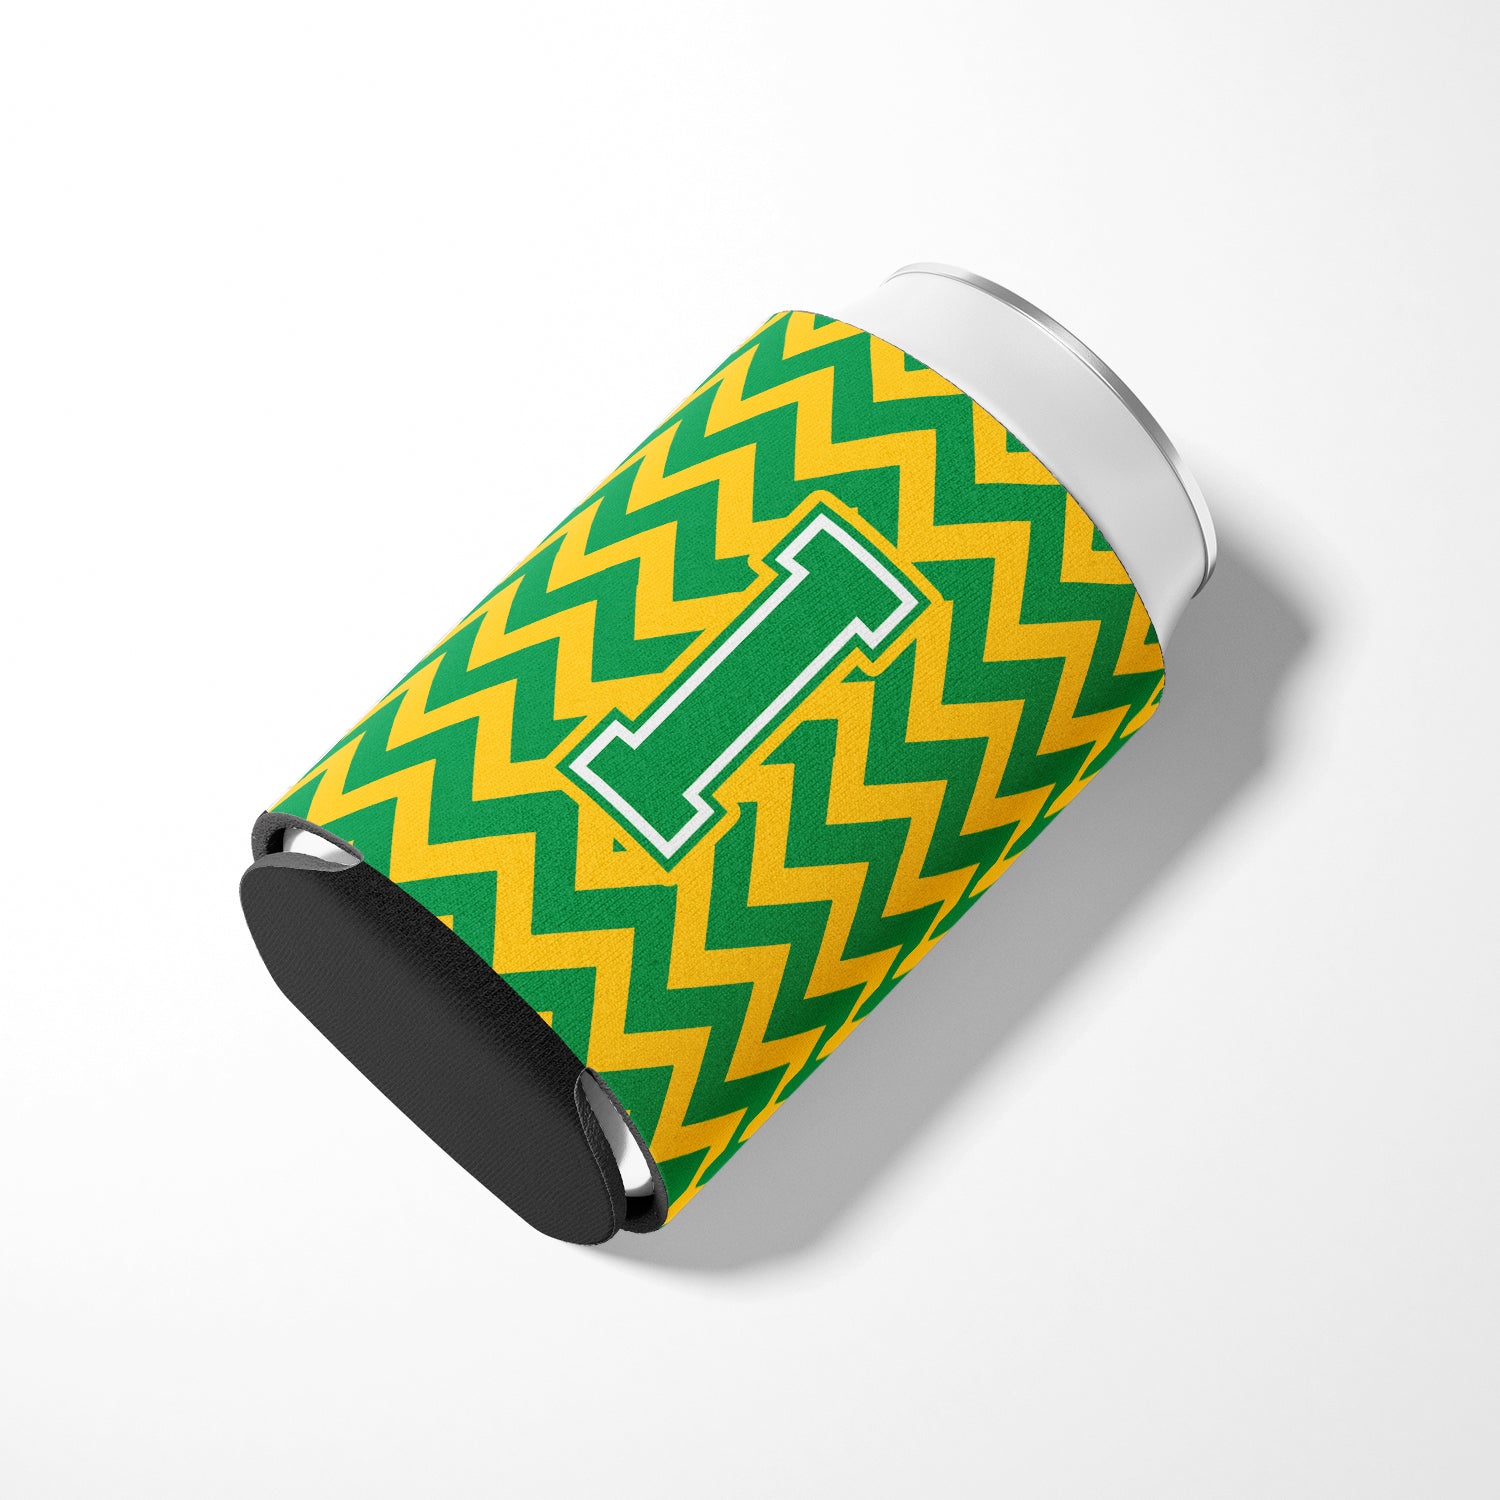 Letter I Chevron Green and Gold Can or Bottle Hugger CJ1059-ICC.